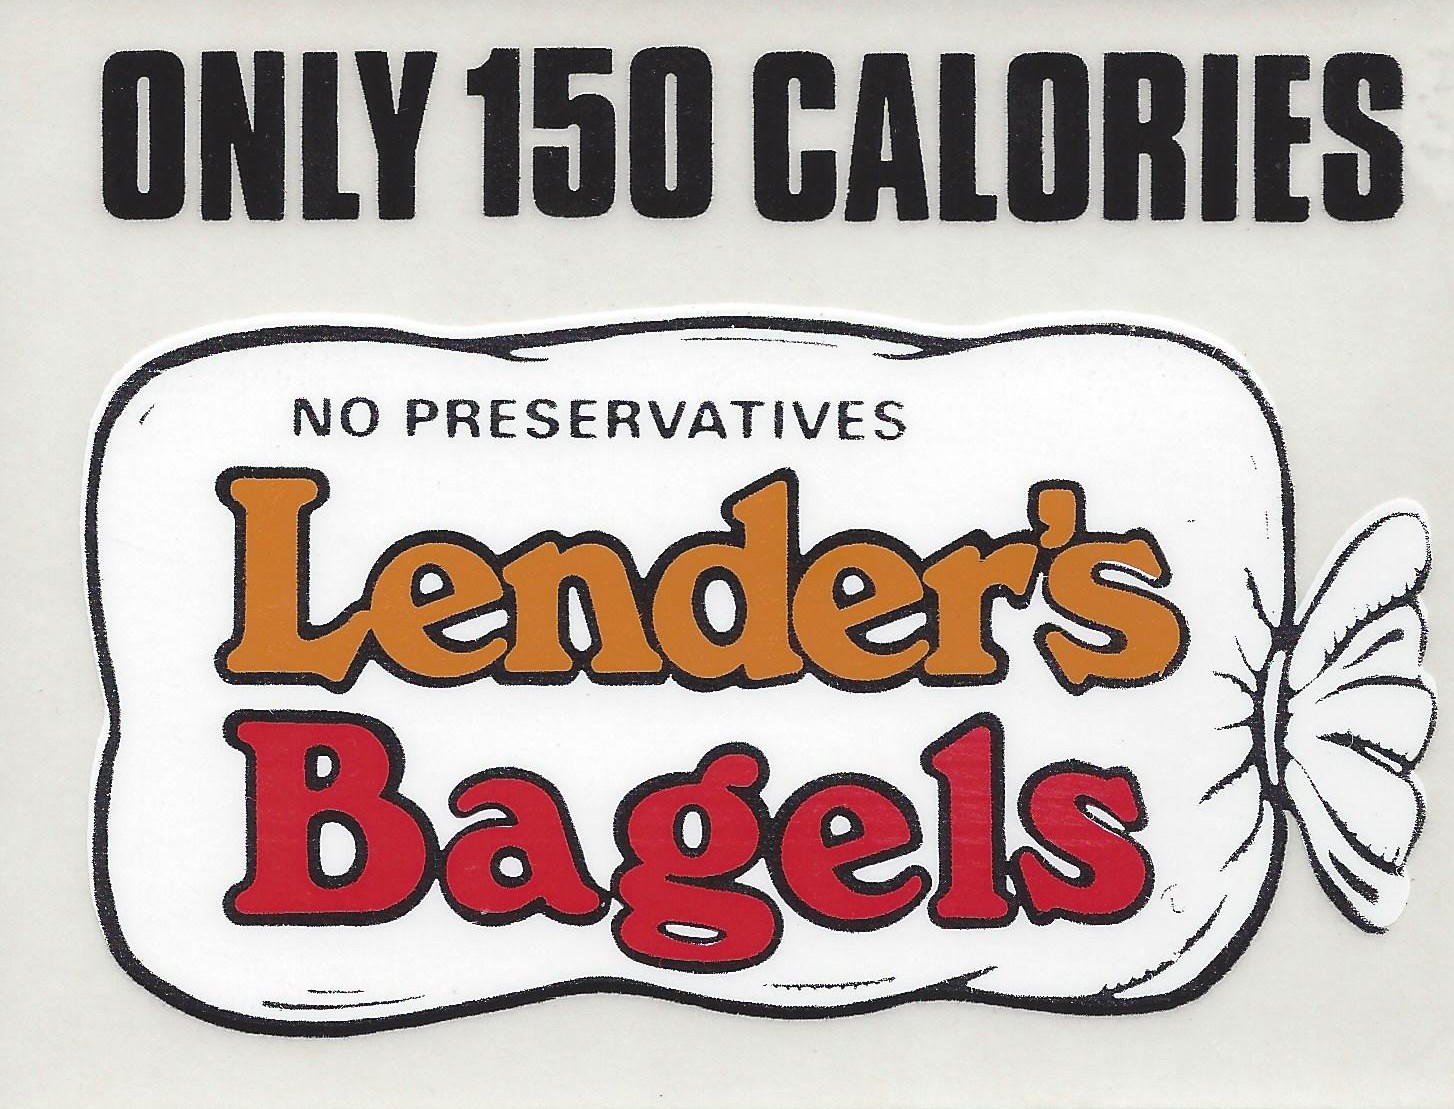 a sign advertising lenders bagsels with only 150 calories